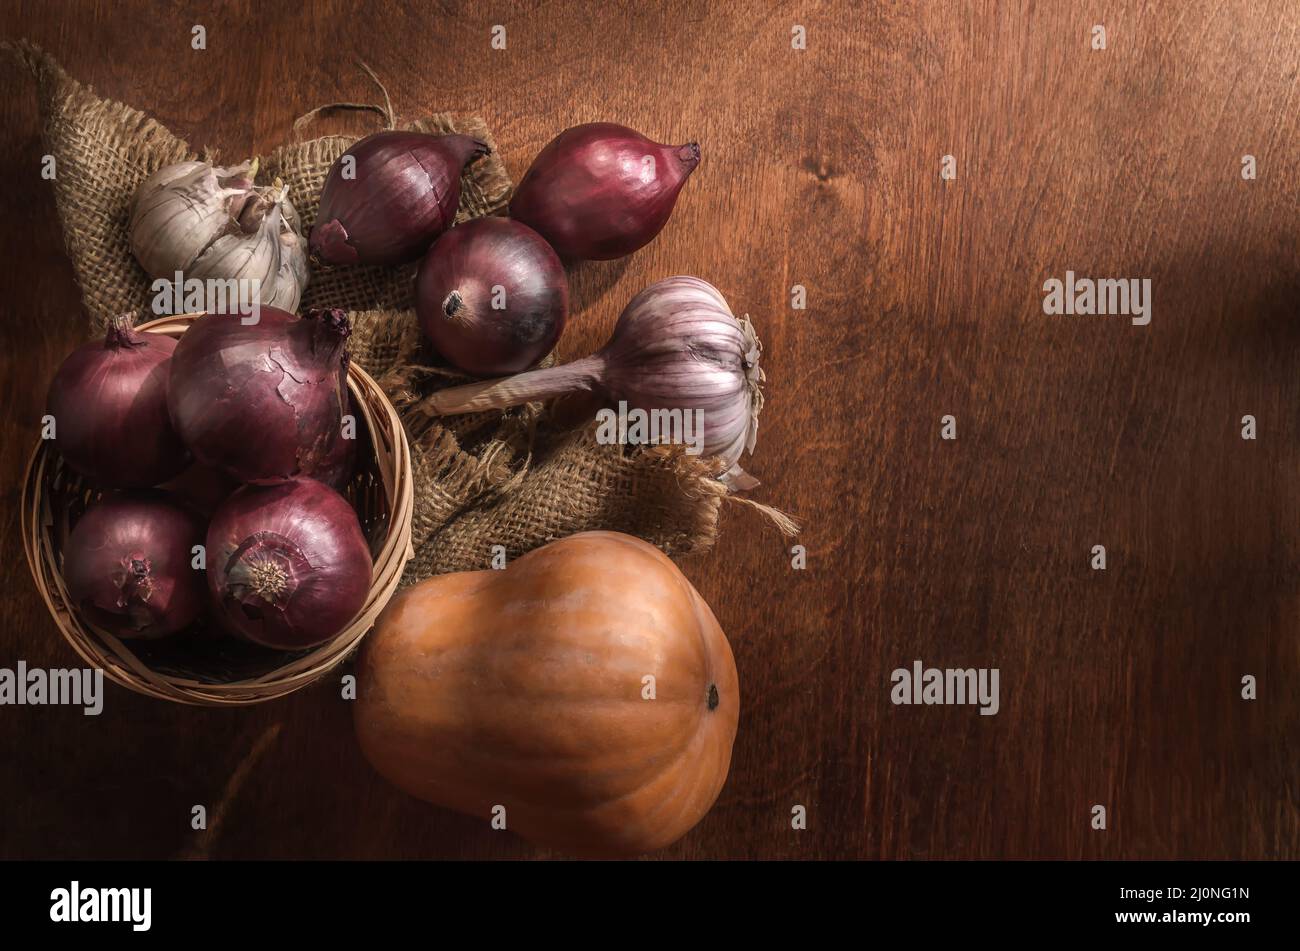 Vegetables on a dark wooden background in a rustic style Stock Photo